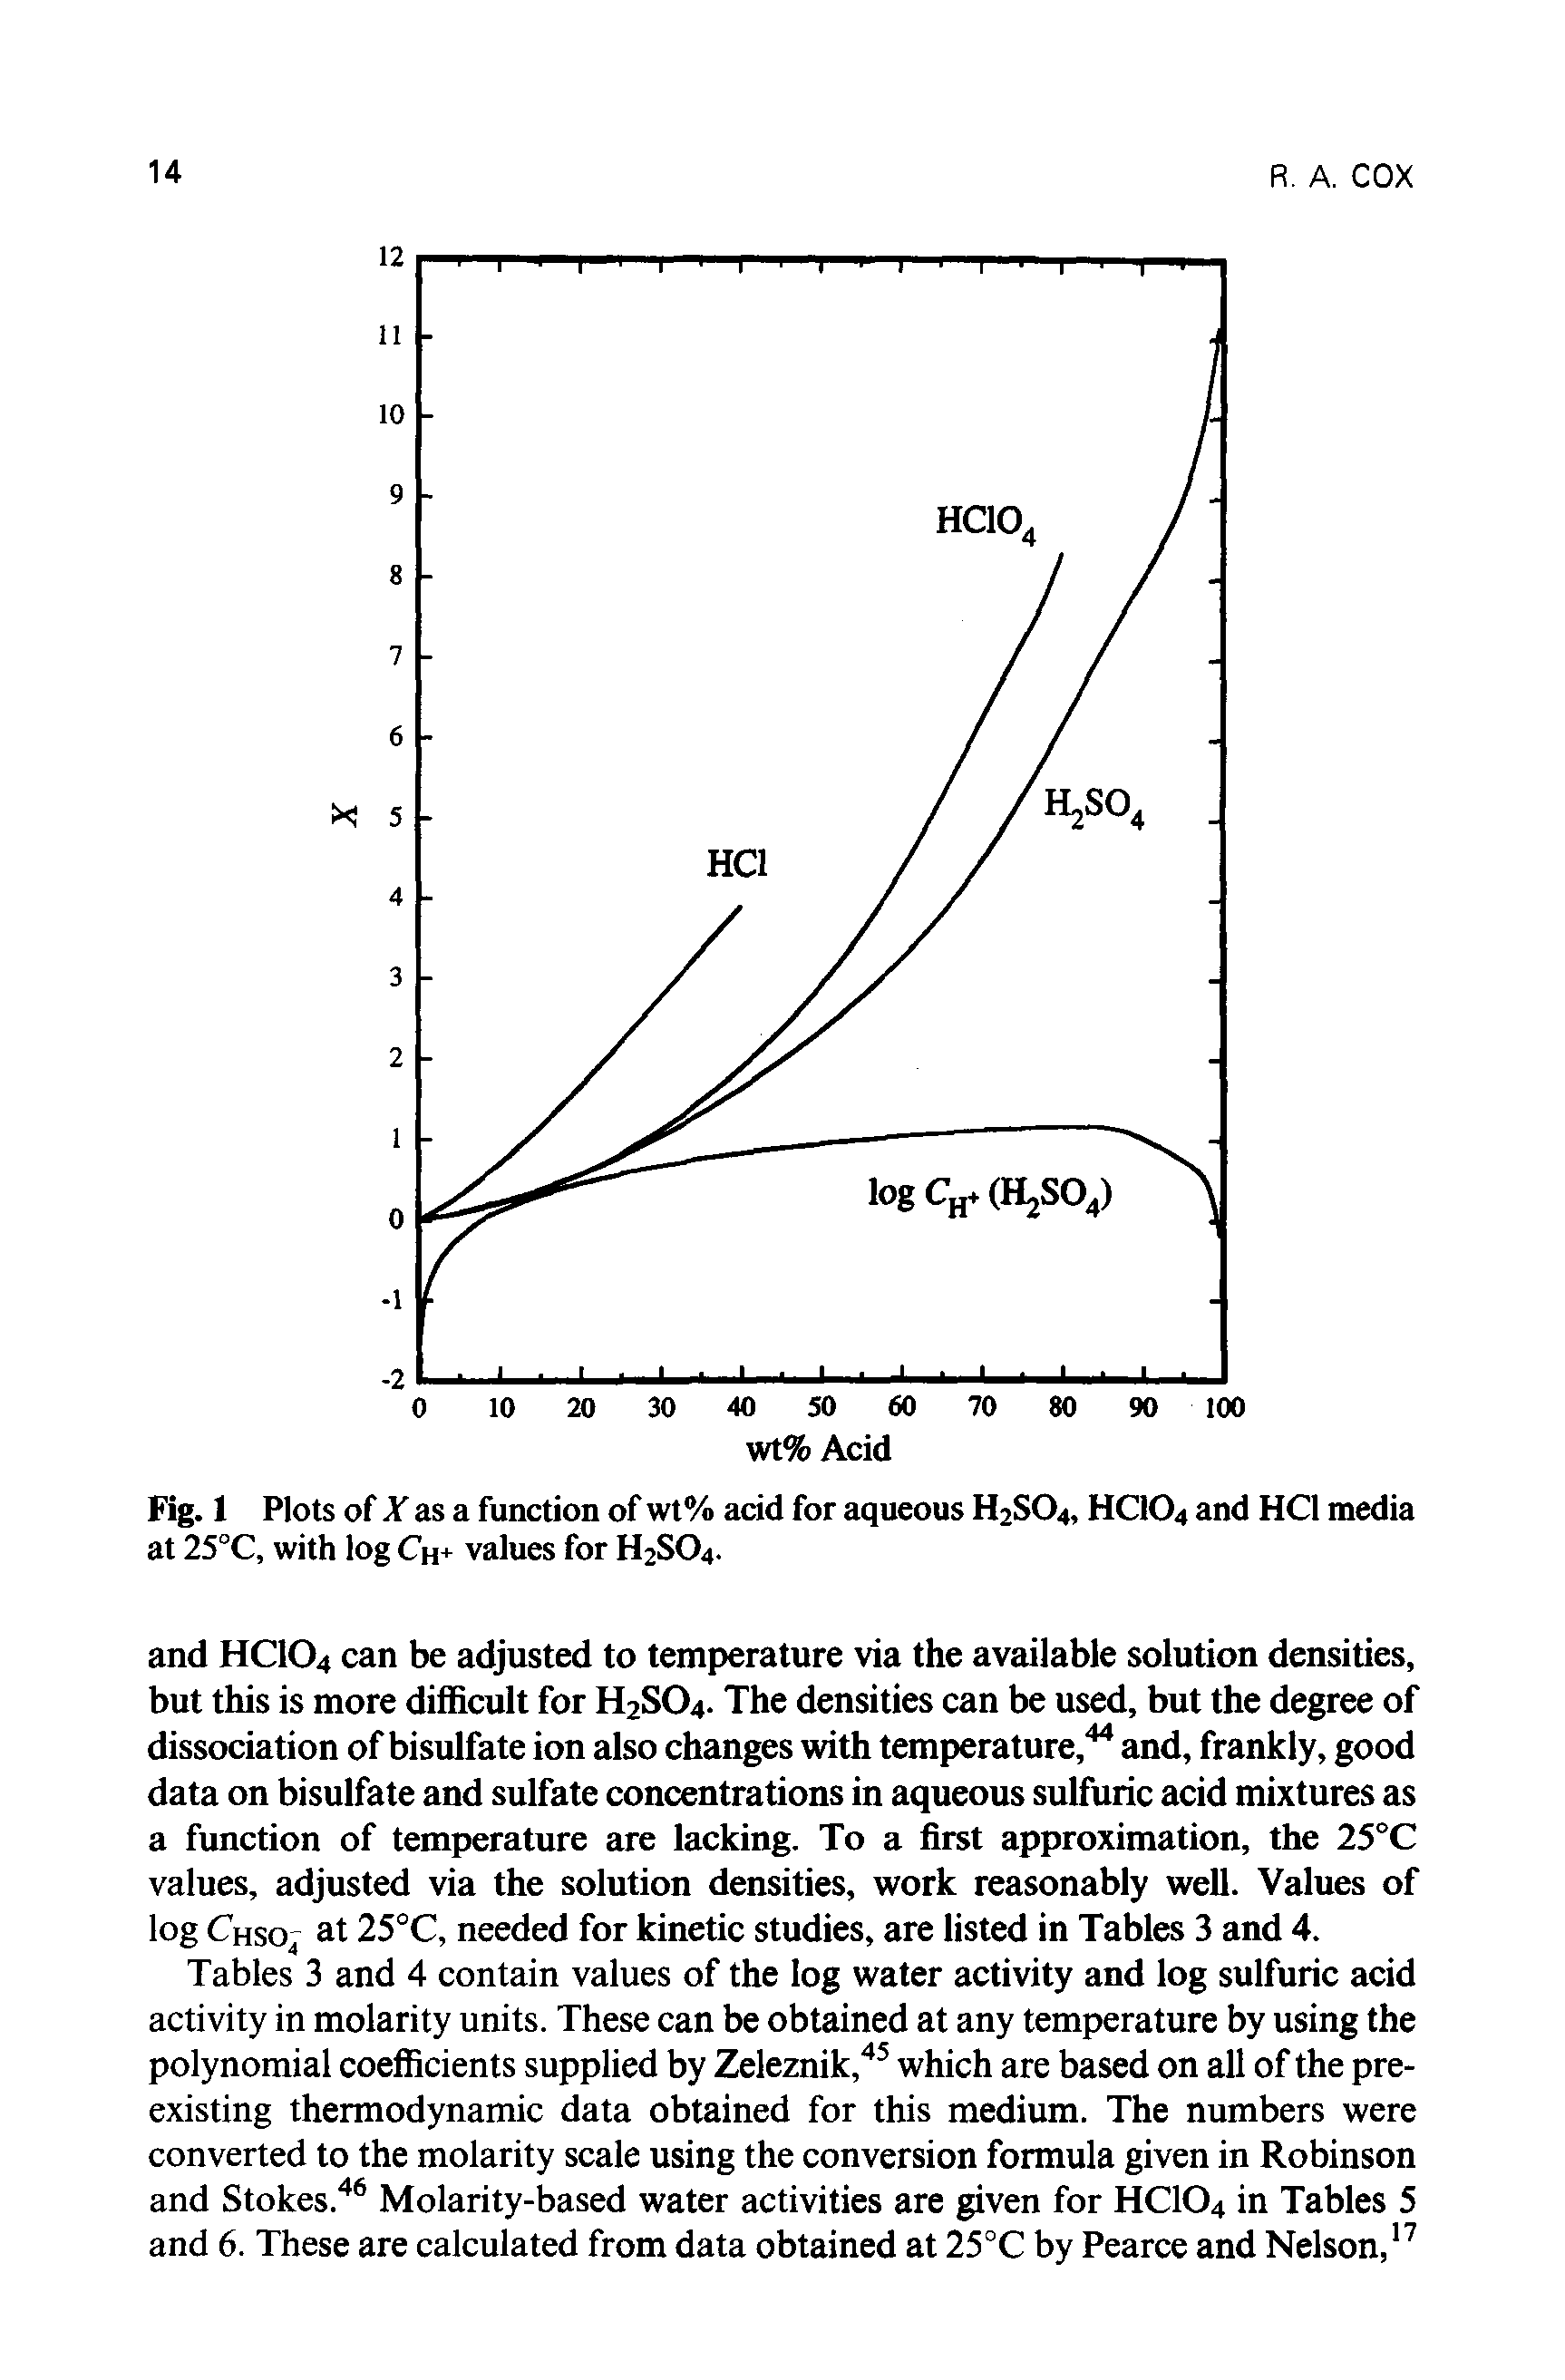 Tables 3 and 4 contain values of the log water activity and log sulfuric acid activity in molarity units. These can be obtained at any temperature by using the polynomial coefficients supplied by Zeleznik,45 which are based on all of the preexisting thermodynamic data obtained for this medium. The numbers were converted to the molarity scale using the conversion formula given in Robinson and Stokes 46 Molarity-based water activities are given for HCIO4 in Tables 5 and 6. These are calculated from data obtained at 25°C by Pearce and Nelson,17...